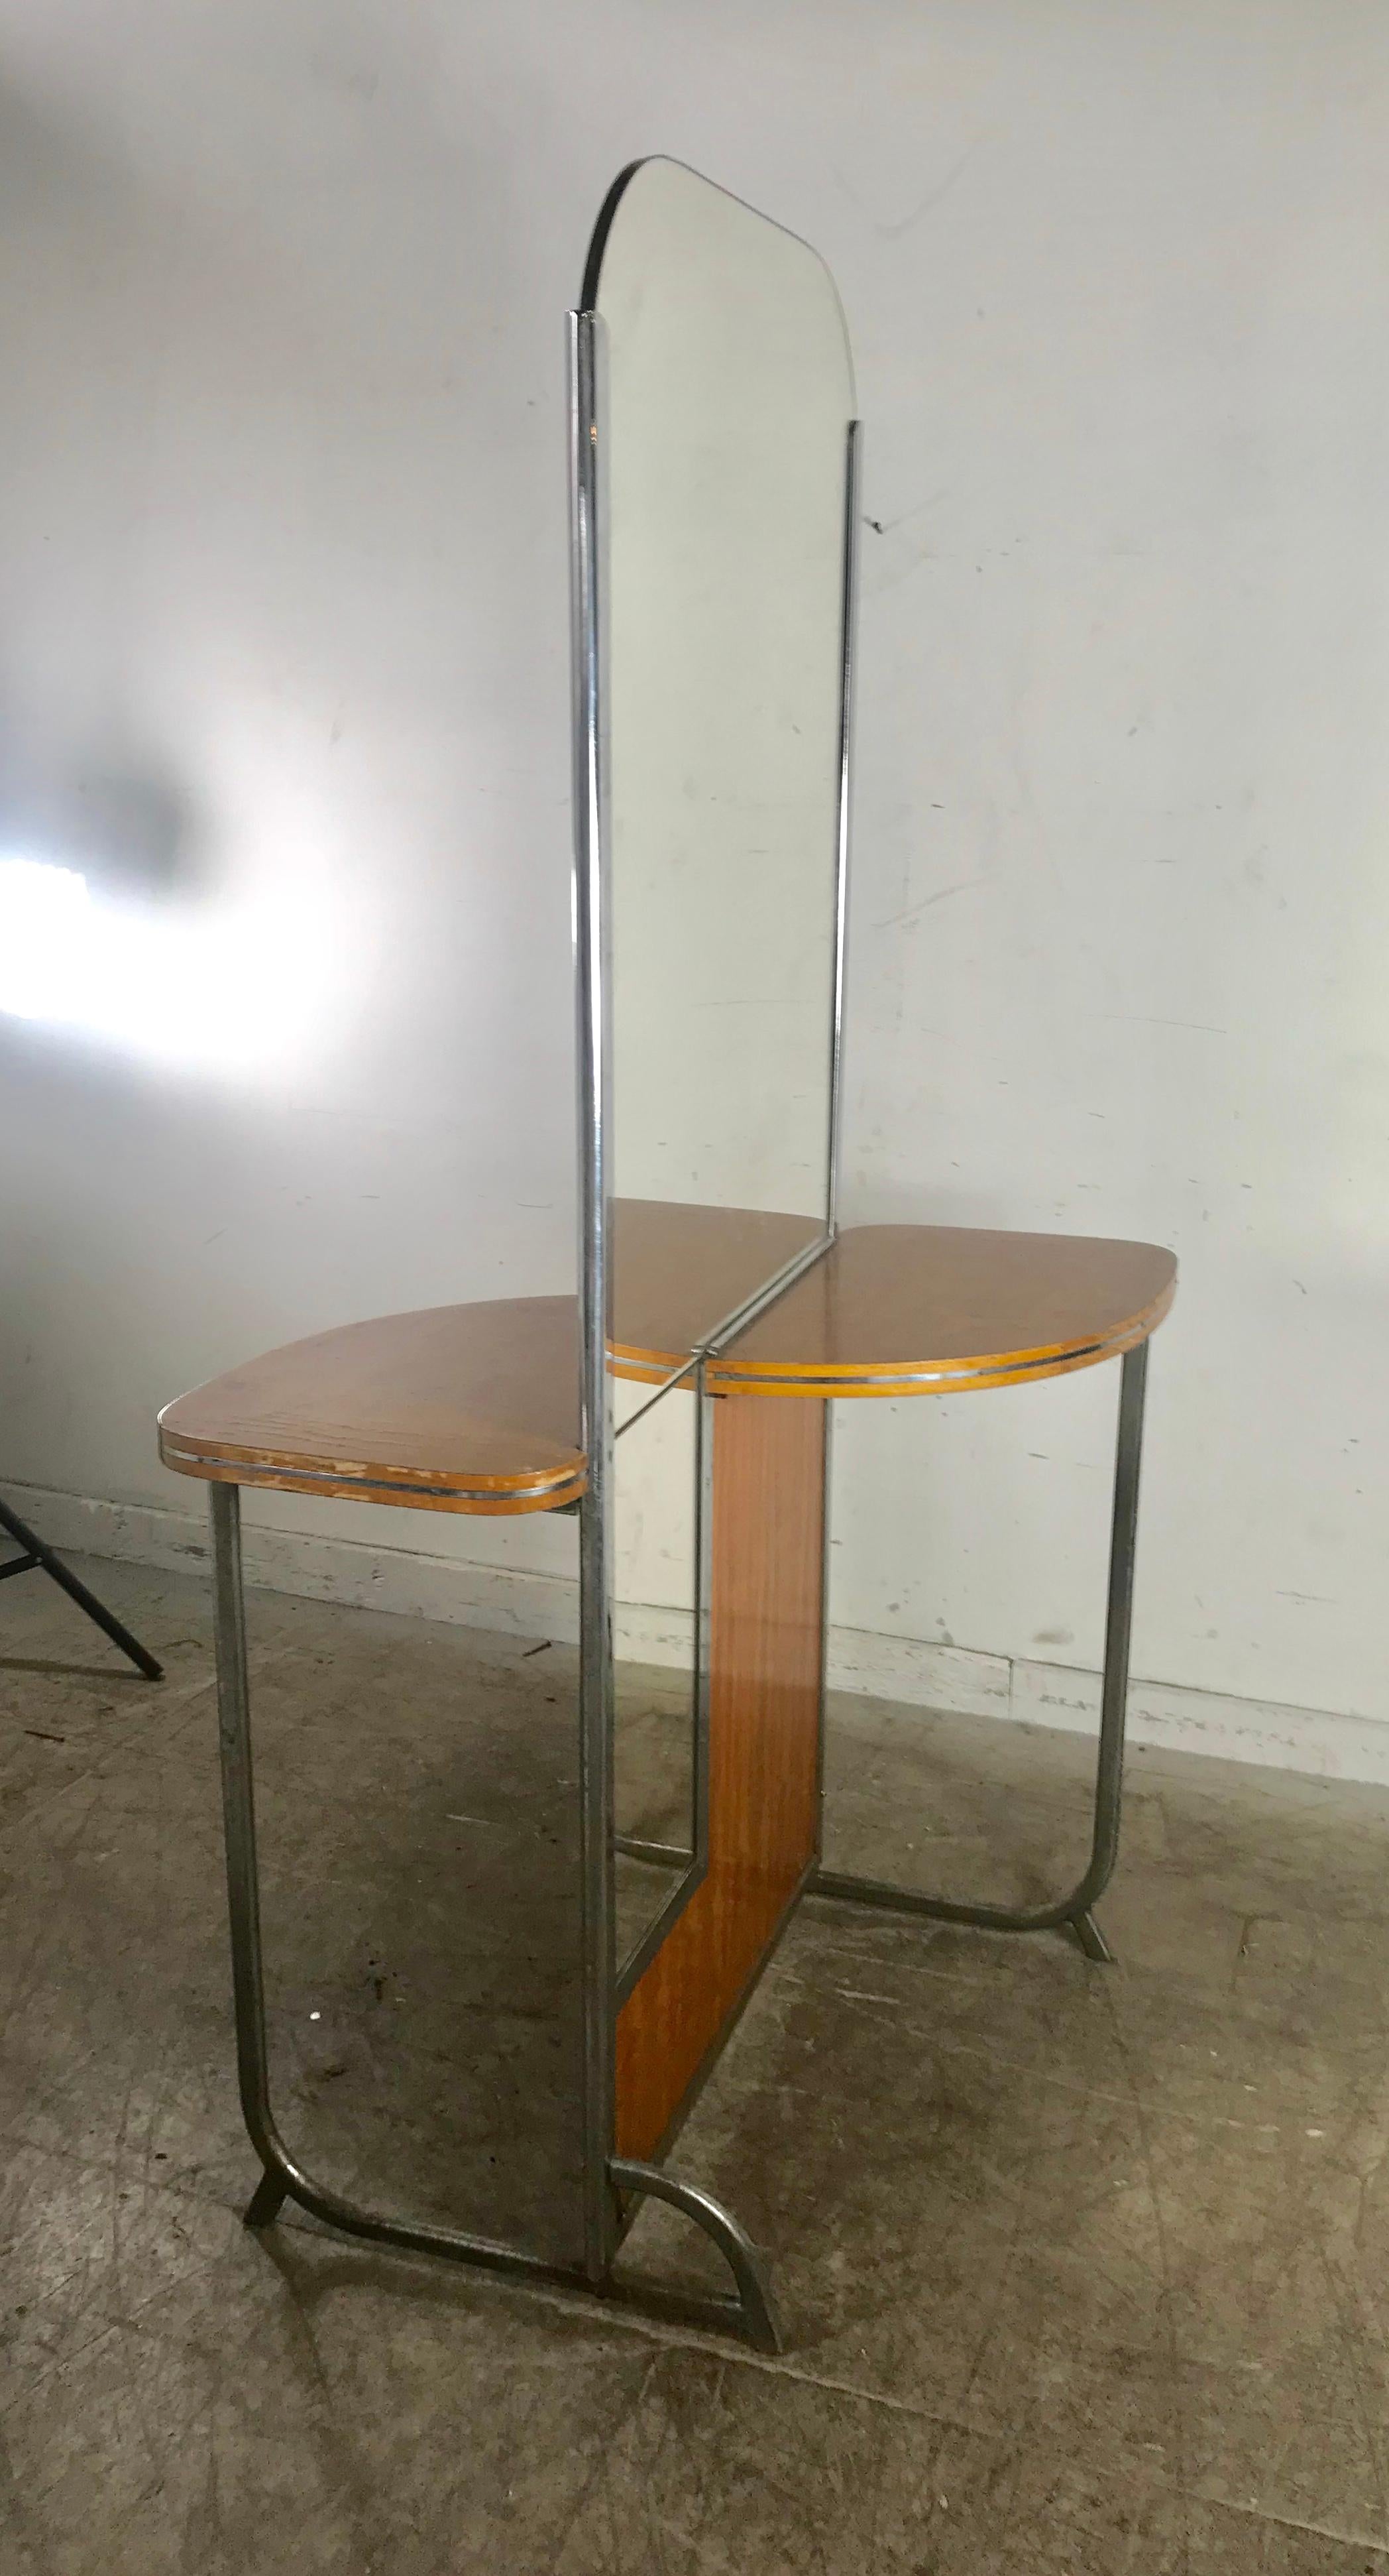 Art Deco Machine Age Double Sided Theater Dressing Room Table, Vanity Mirror In Good Condition For Sale In Buffalo, NY